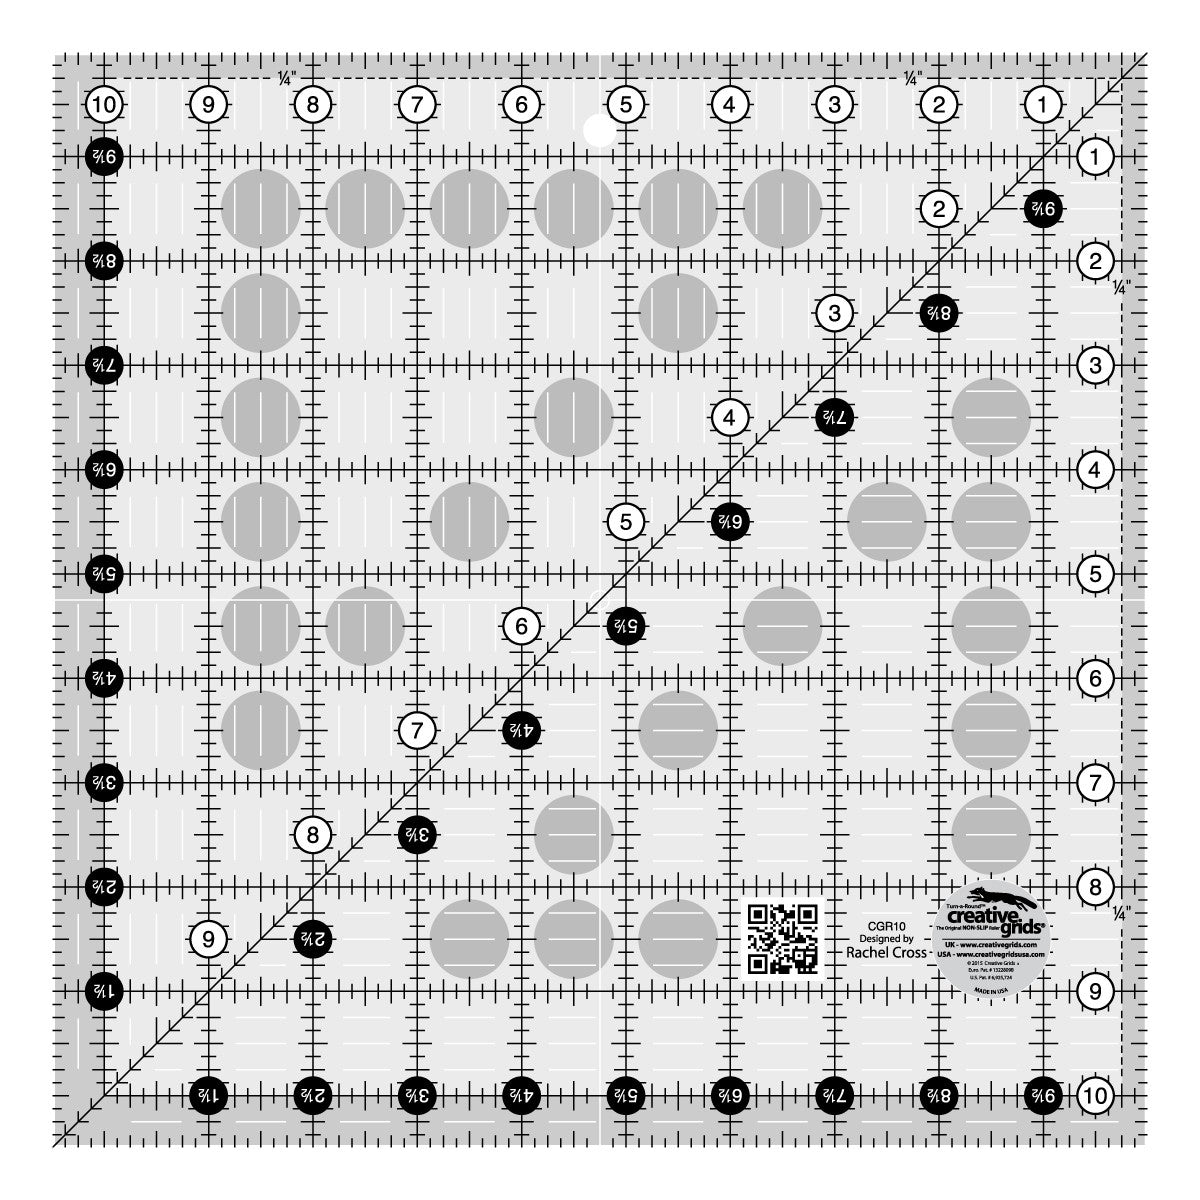 Creative Grids 10-1/2-Inch Square Quilt Ruler (CGR10)